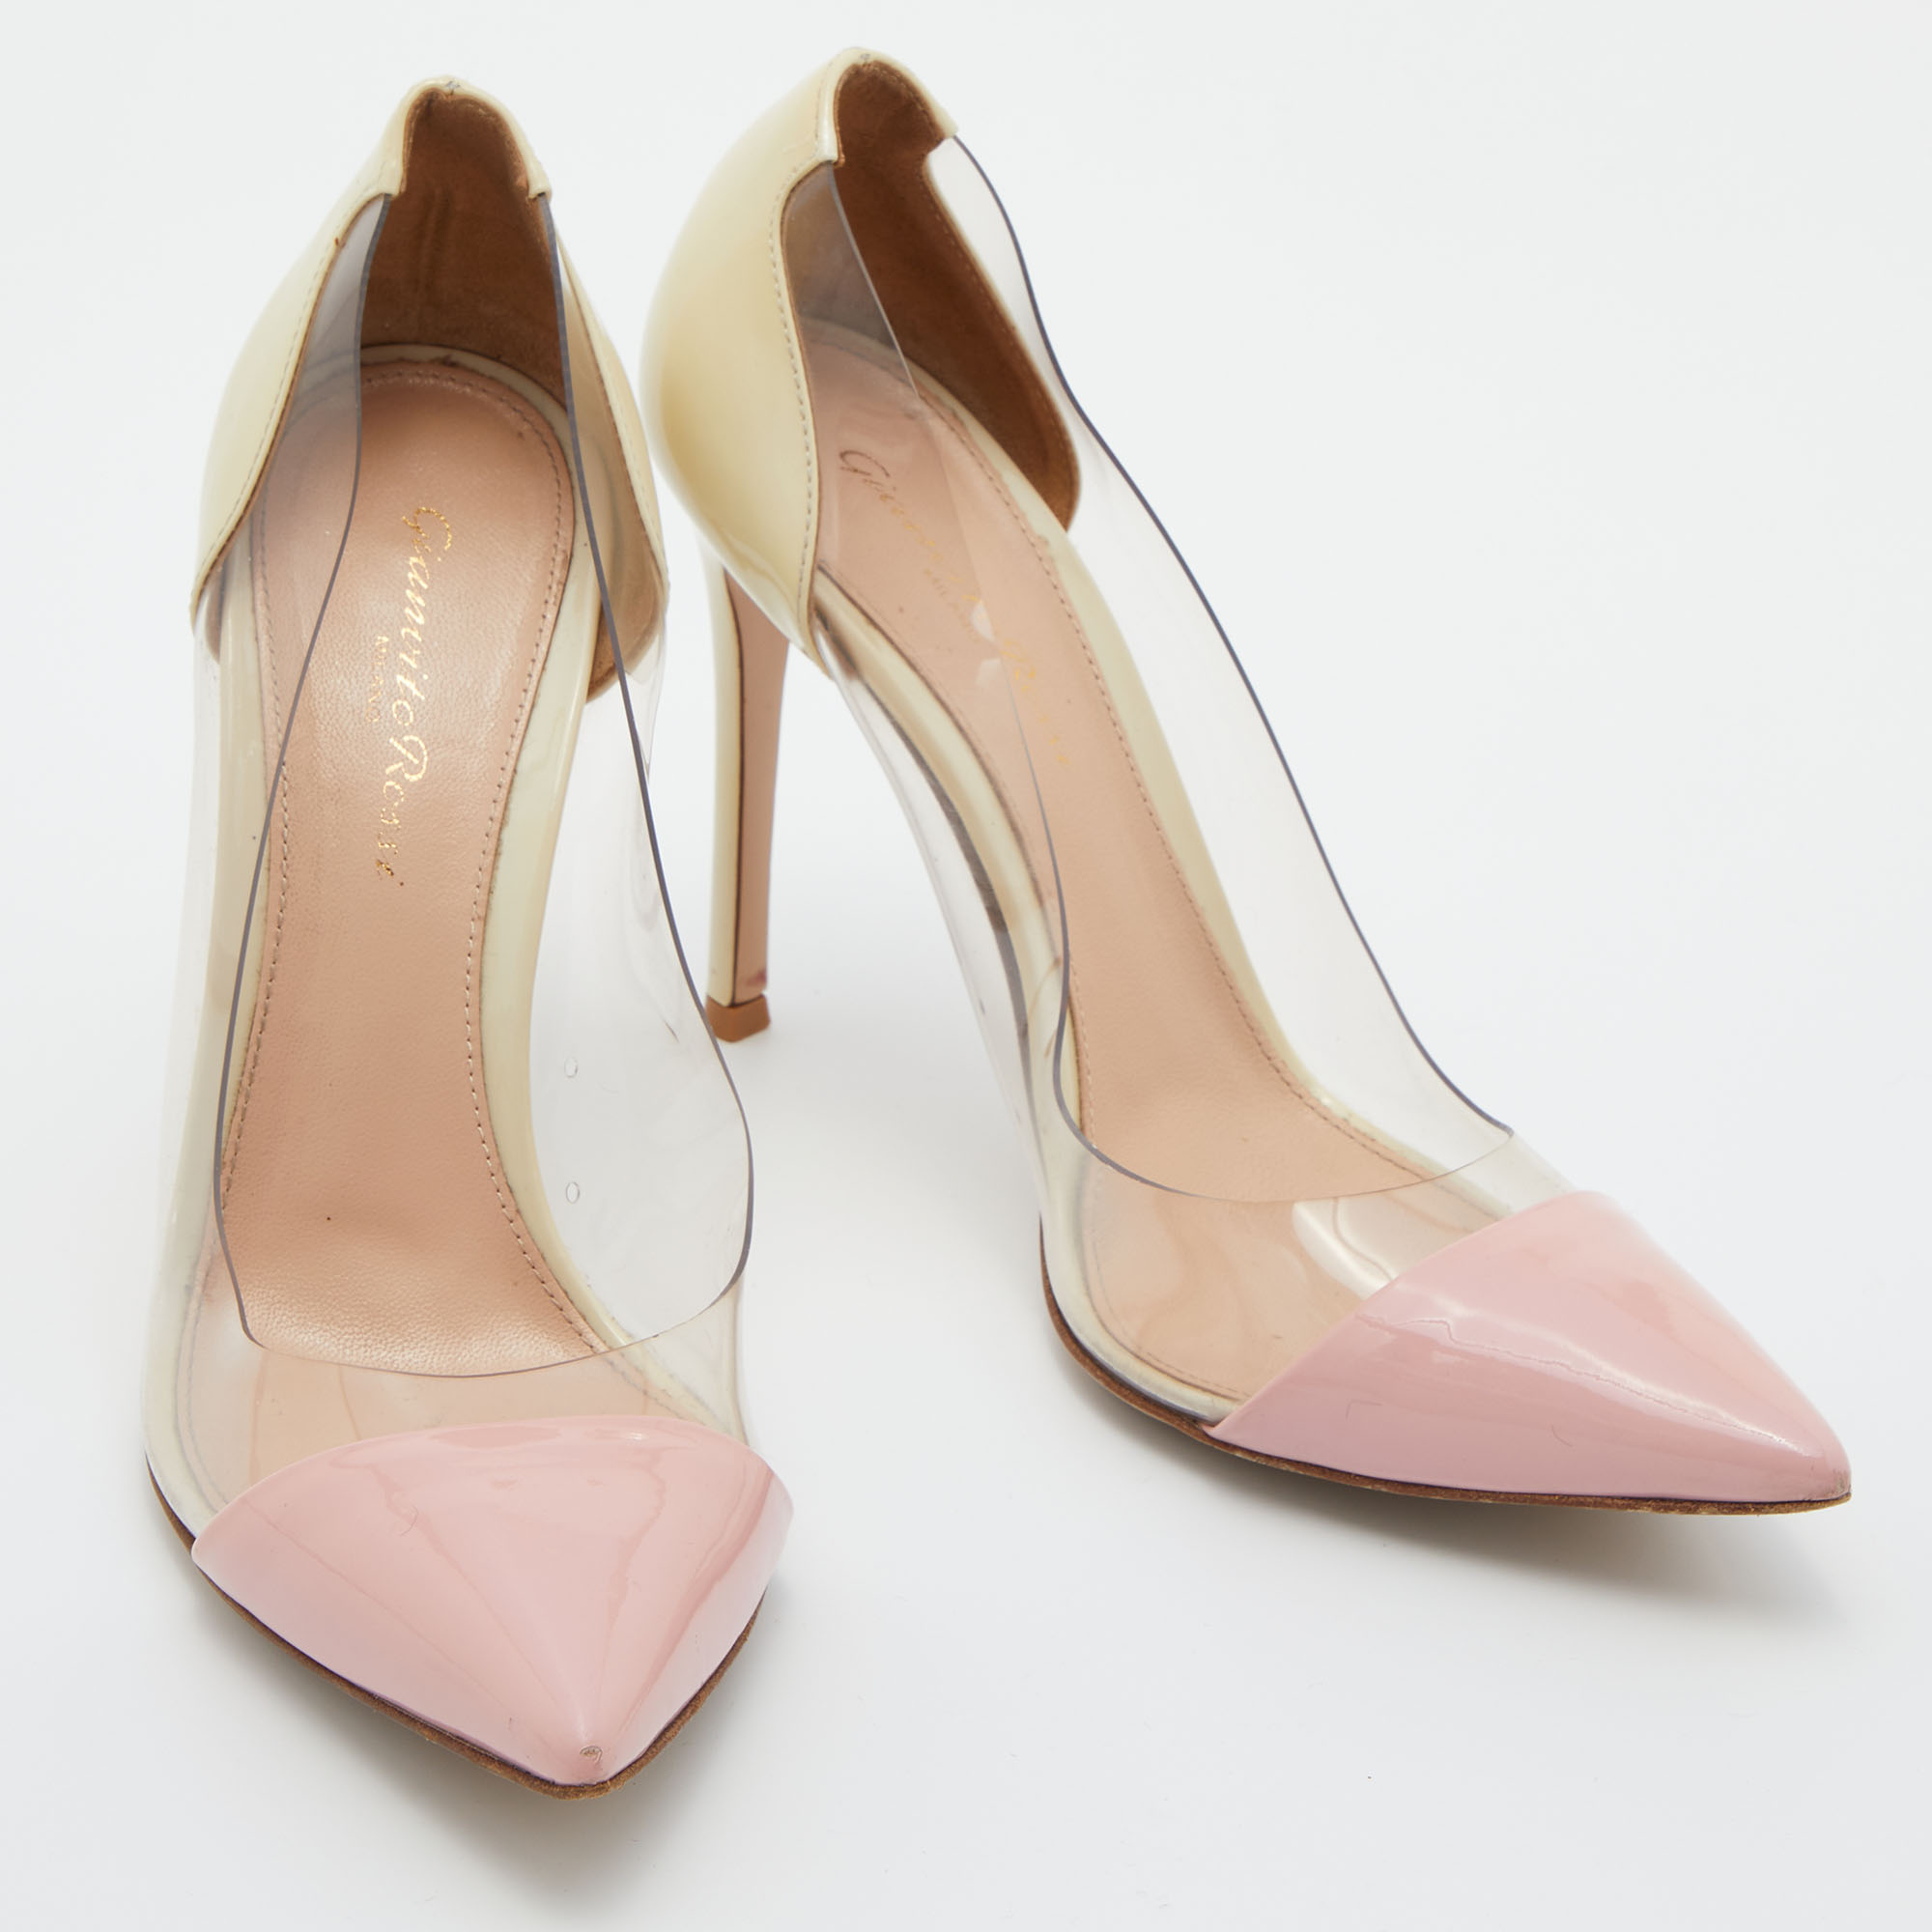 Gianvito Rossi Light Yellow/Pink Patent Leather And PVC Plexi Pumps Size 38